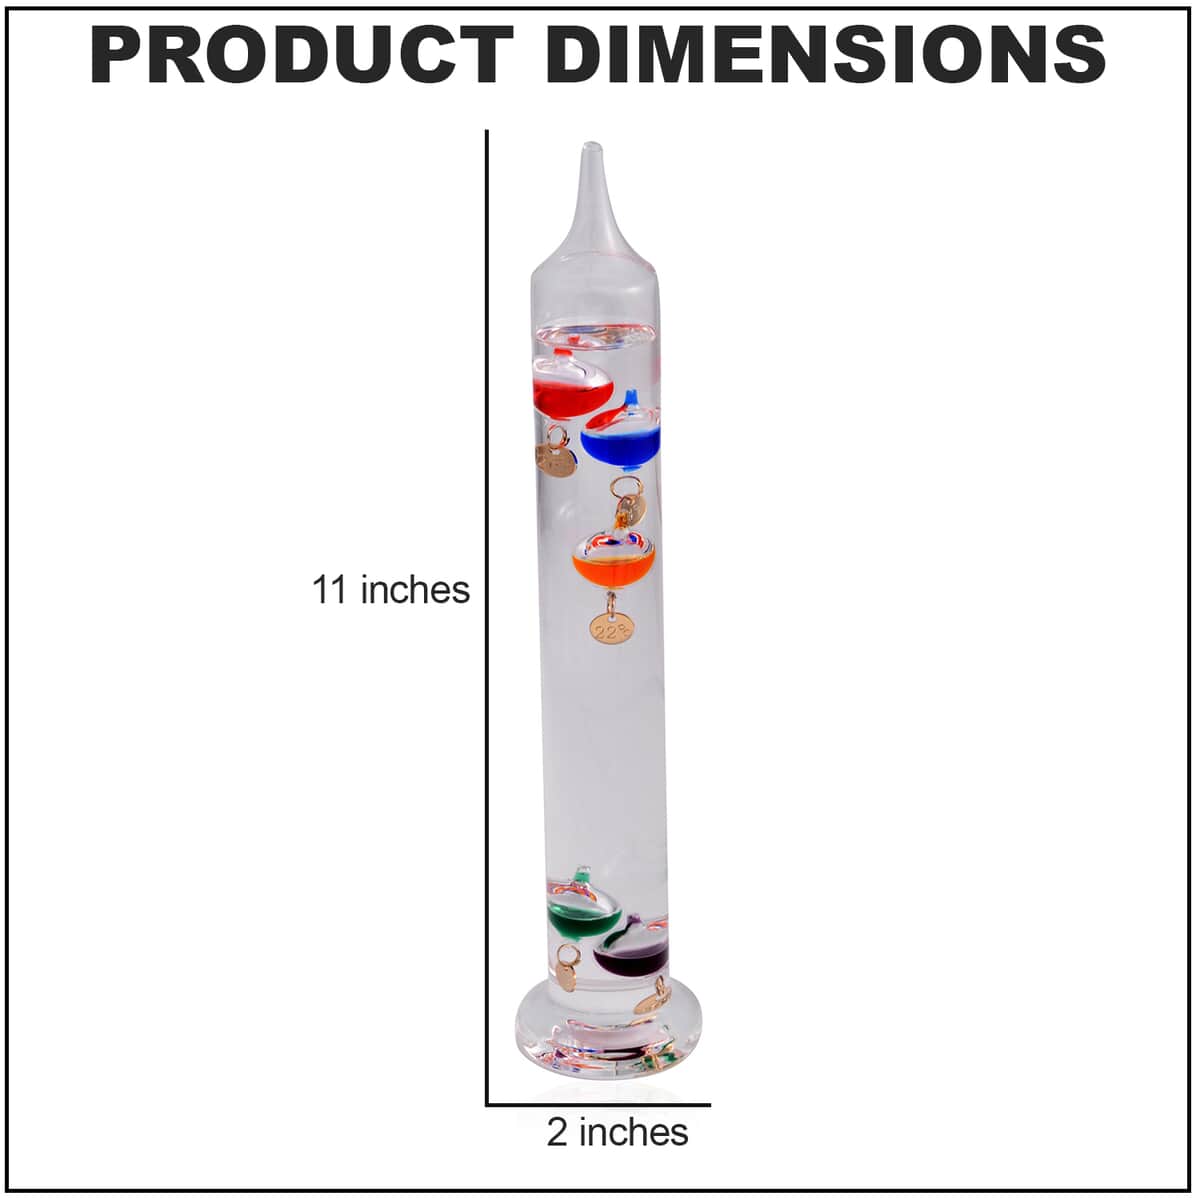 Multicolor Galileo Thermometer with Floating Balls, Weather Predictor Office Home Desk Table Decor, Indoor Decorations Gifts image number 3